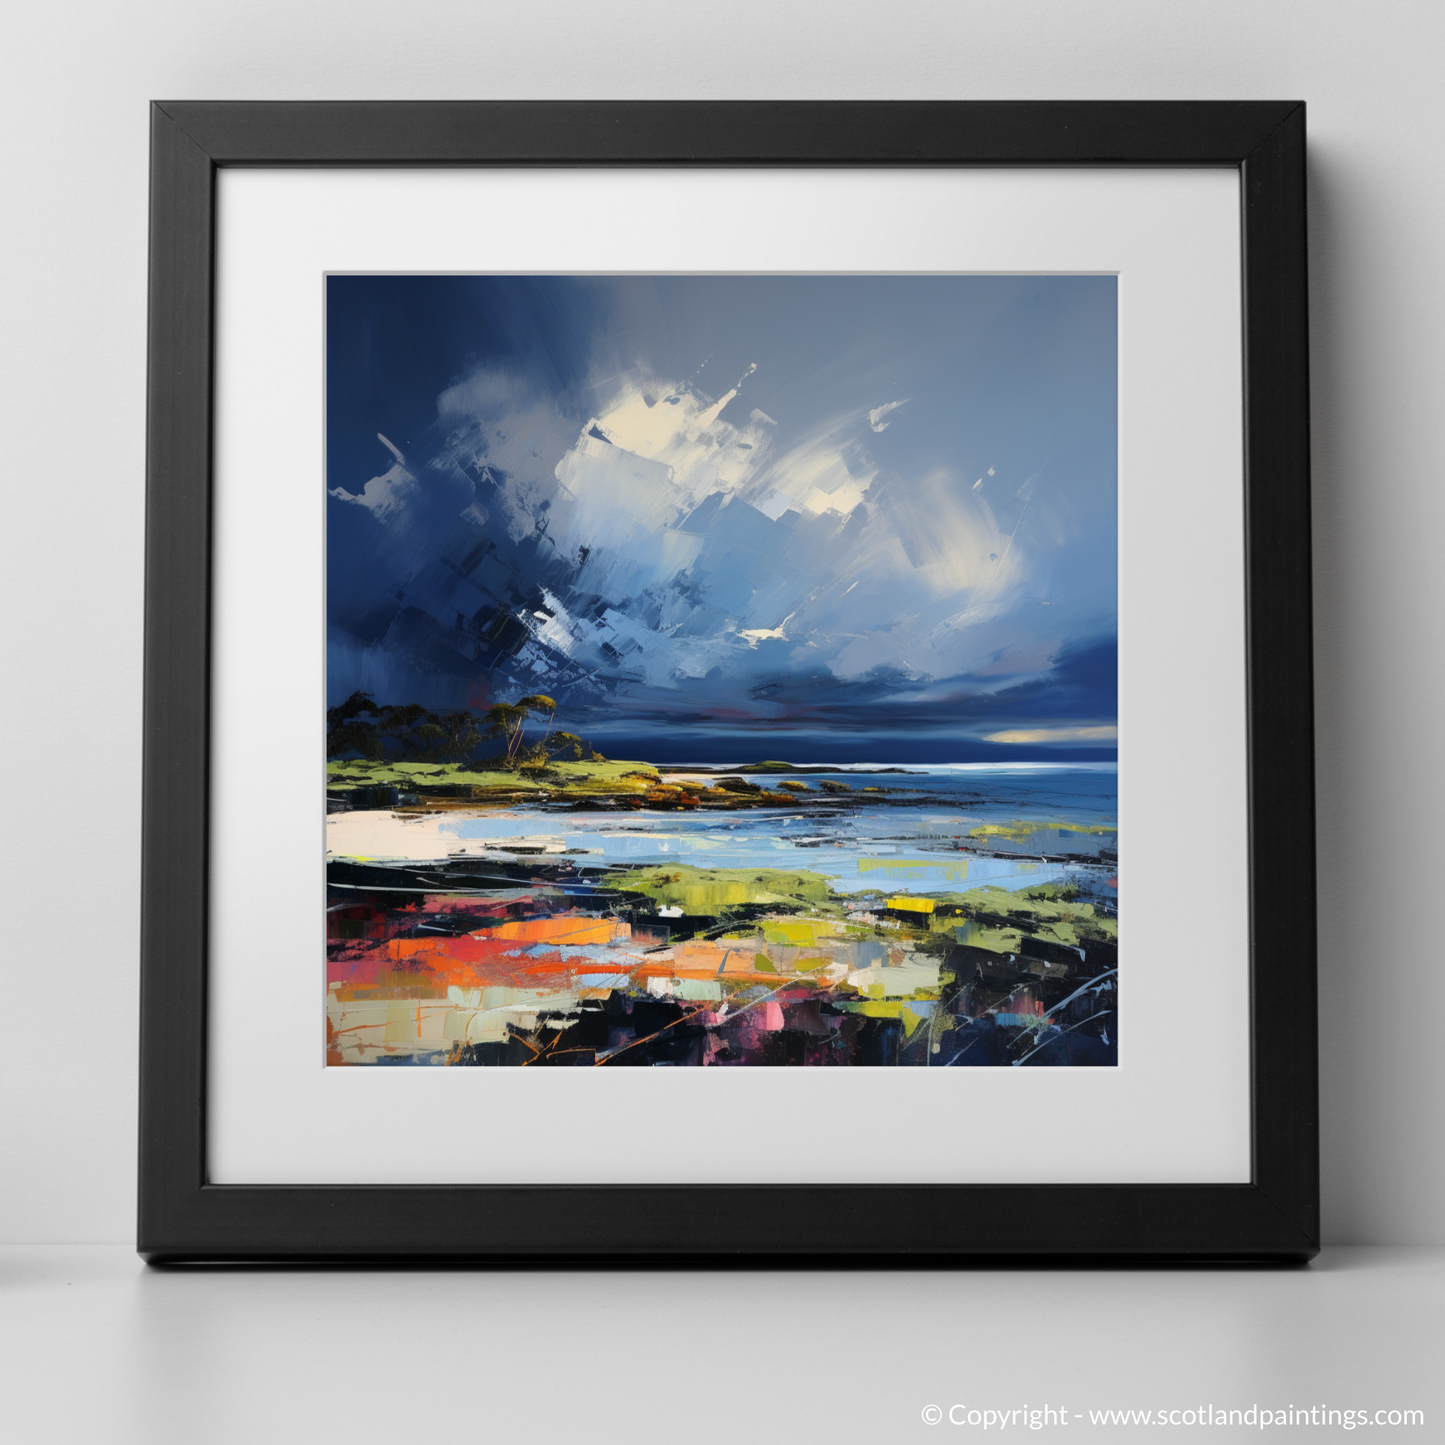 Art Print of Largo Bay with a stormy sky with a black frame